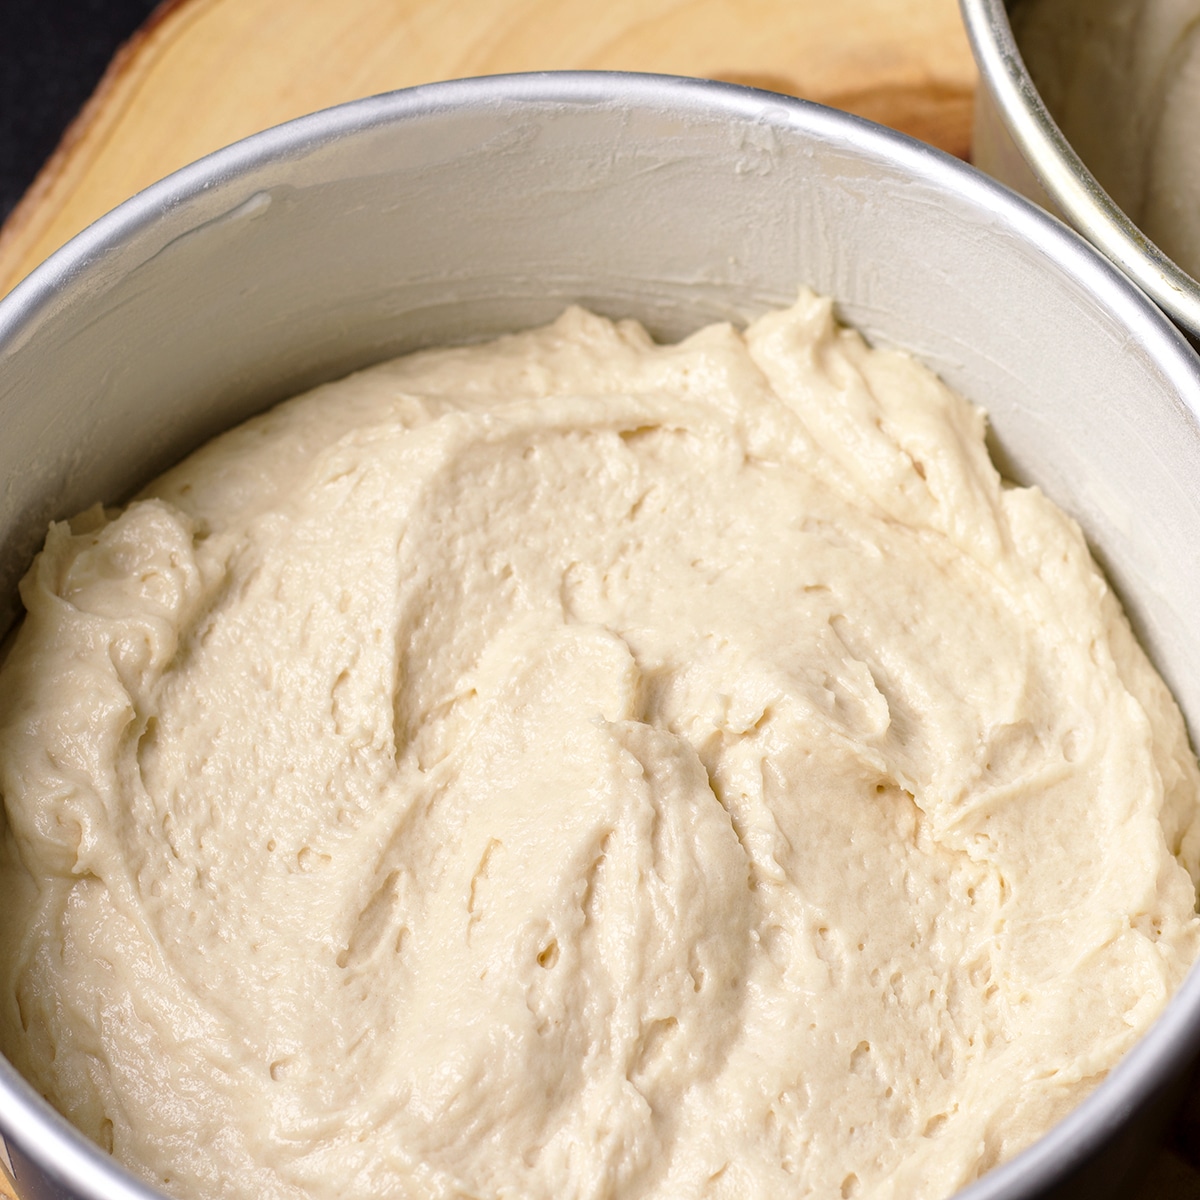 Two round cake pans filled with cake batter that is ready to bake.